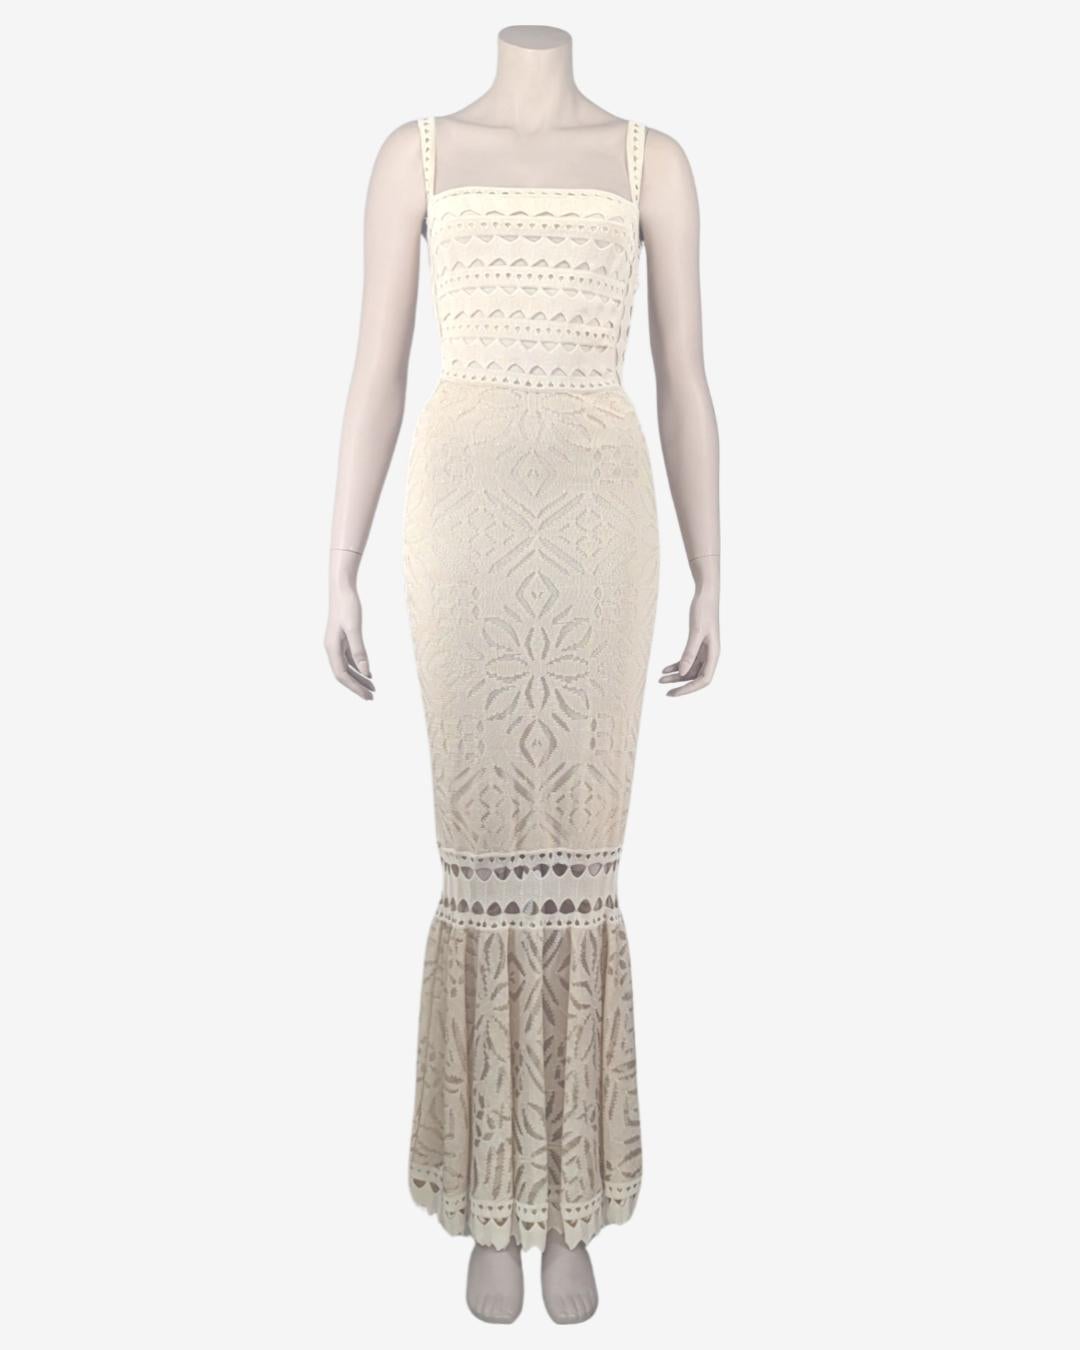 Adam Jones Paris Maxi Cut Out Knit Dress. Adam Jones was the designer behind the knit of Christian Dior during 8 years. In 2001, he launched Adam Jones Paris and this dress was one of its collection Tahiti.

. Cutouts on each sides
· Open Back
. No